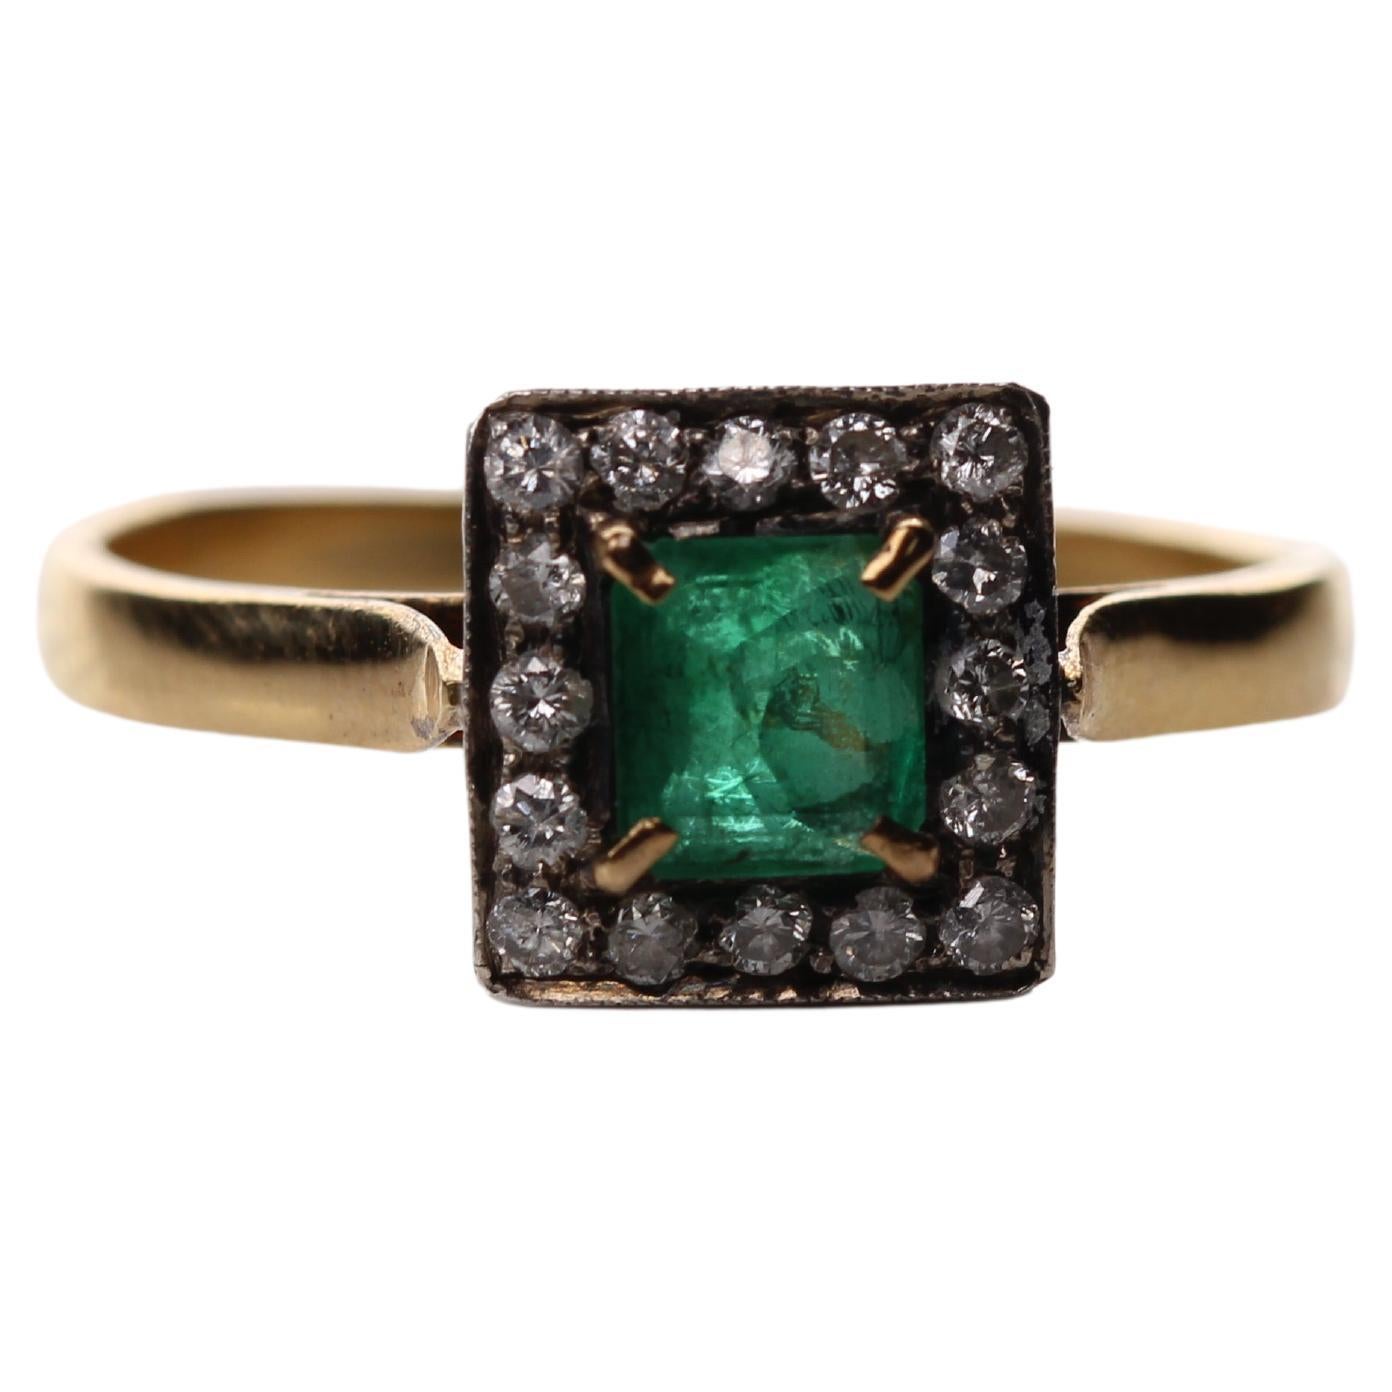 Beautiful Emerald Ring, surrounded by diamonds. The emerald is square shaped, transparent and has a great emerald green color. It weights ca. 0.45ct. The ring looks stunning on a hand. 
The 16 diamonds have a total weight of ca. 0.2ct and are alined